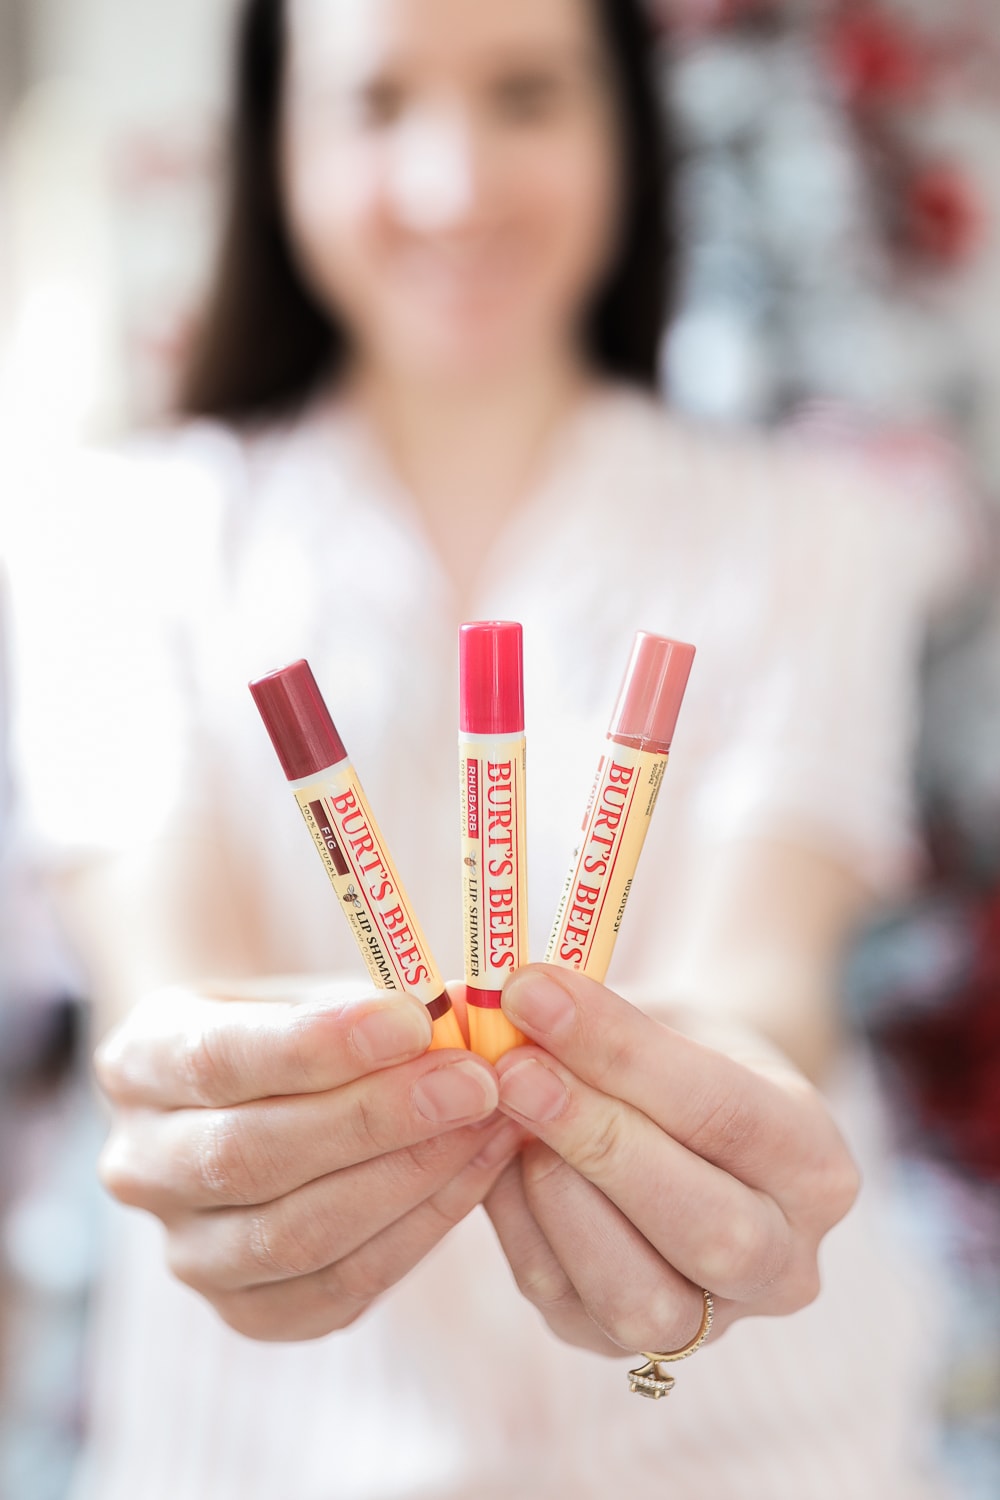 Burt's Bees fig lip shimmer, rhubarb lip shimmer, and peony lip shimmer from the Burt's Bees Mistletoe Kiss Gift Set Warm Collection featured by blogger Stephanie Ziajka on Diary of a Debutante